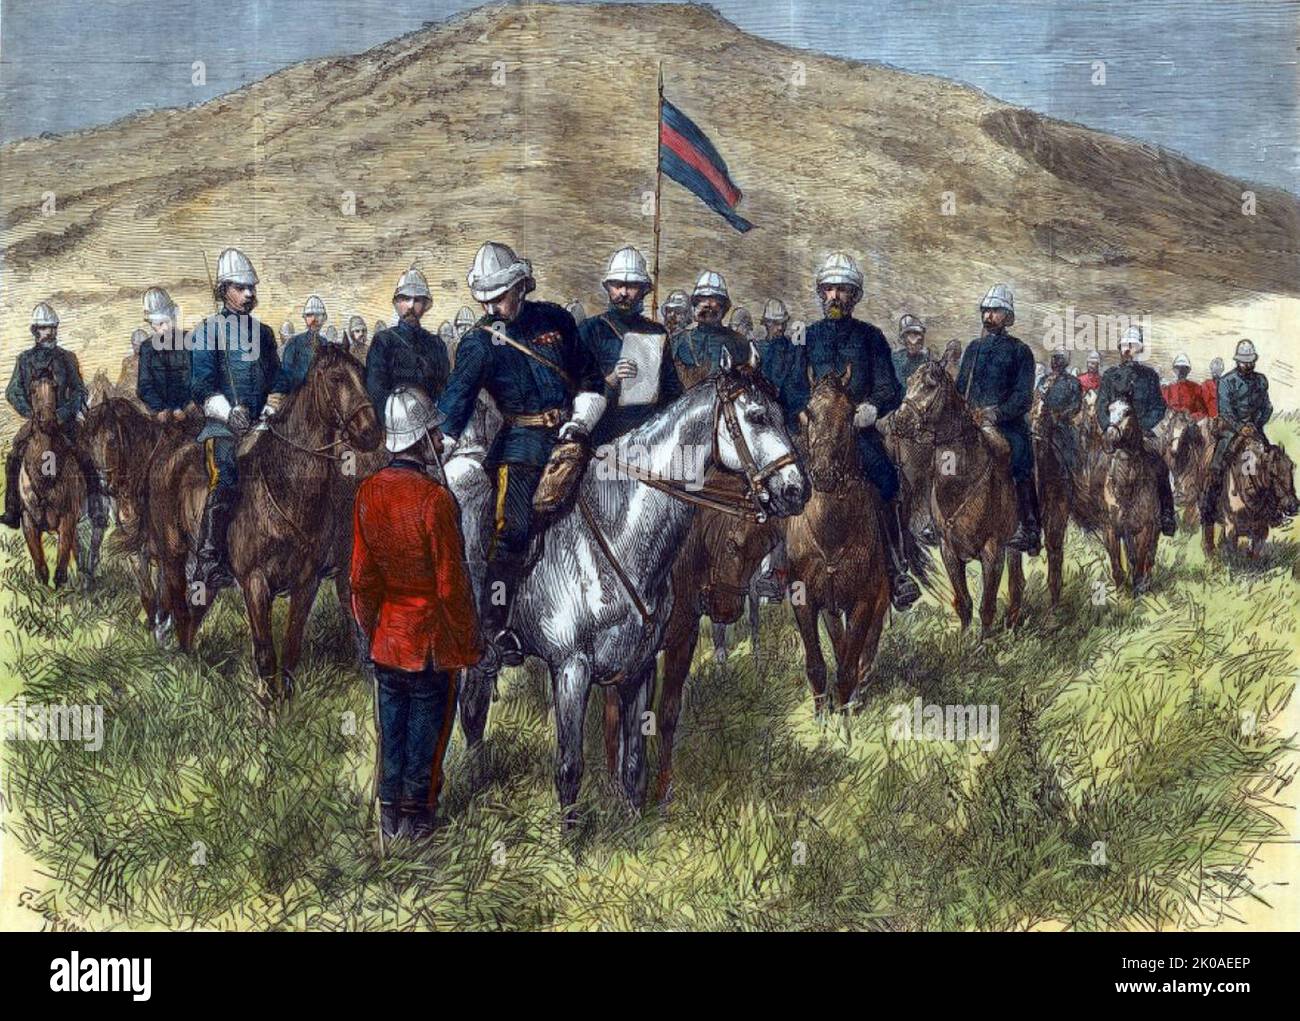 The Zulu War - Sir Garnet Wolseley presenting the Victoria Cross to Major Chard, Royal Engineers, at Inkwenke Camp, 1879. The Battle of Rorke's Drift (1879), also known as the Defence of Rorke's Drift, was an engagement in the Anglo-Zulu War. The successful British defence of the mission station of Rorke's Drift, under the command of Lieutenants John Chard of the Royal Engineers and Gonville Bromhead, 24th Regiment of Foot began when a large contingent of Zulu warriors broke off from their main force during the final hour of the British defeat at the day-long Battle of Isandlwana on 22 January Stock Photo